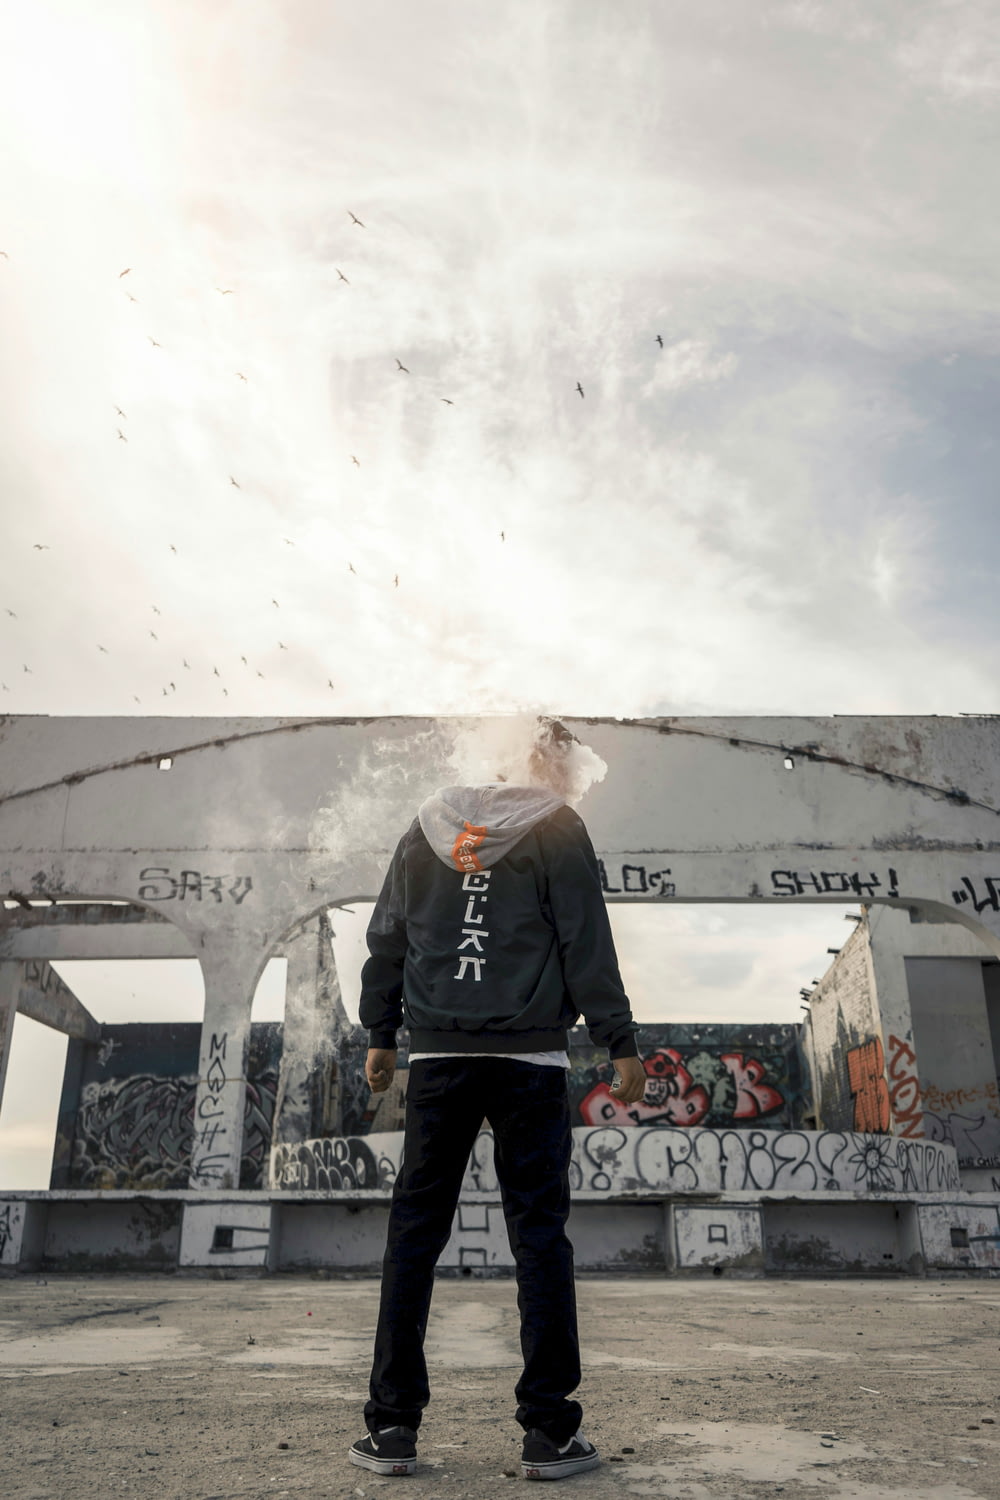 headless person in black hoodie and pants standing near concrete structure